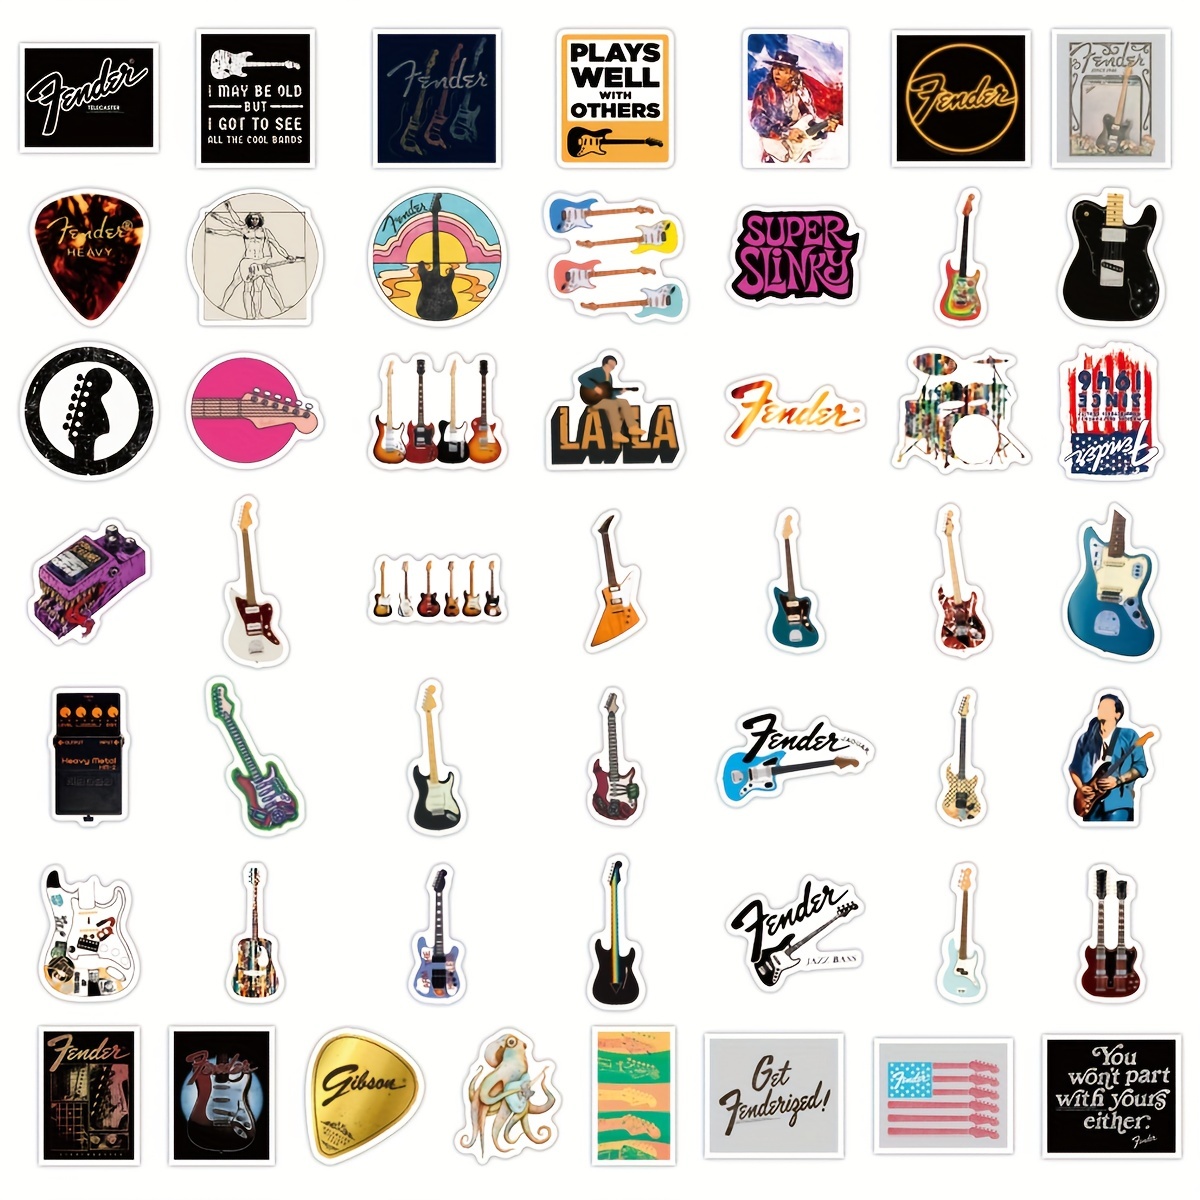 100pcs Rock Band Stickers Classic Rock Music Stickers Waterproof Guitar Stickers for Water Bottles, Rock Roll Punk Vintage Stickers for Laptop